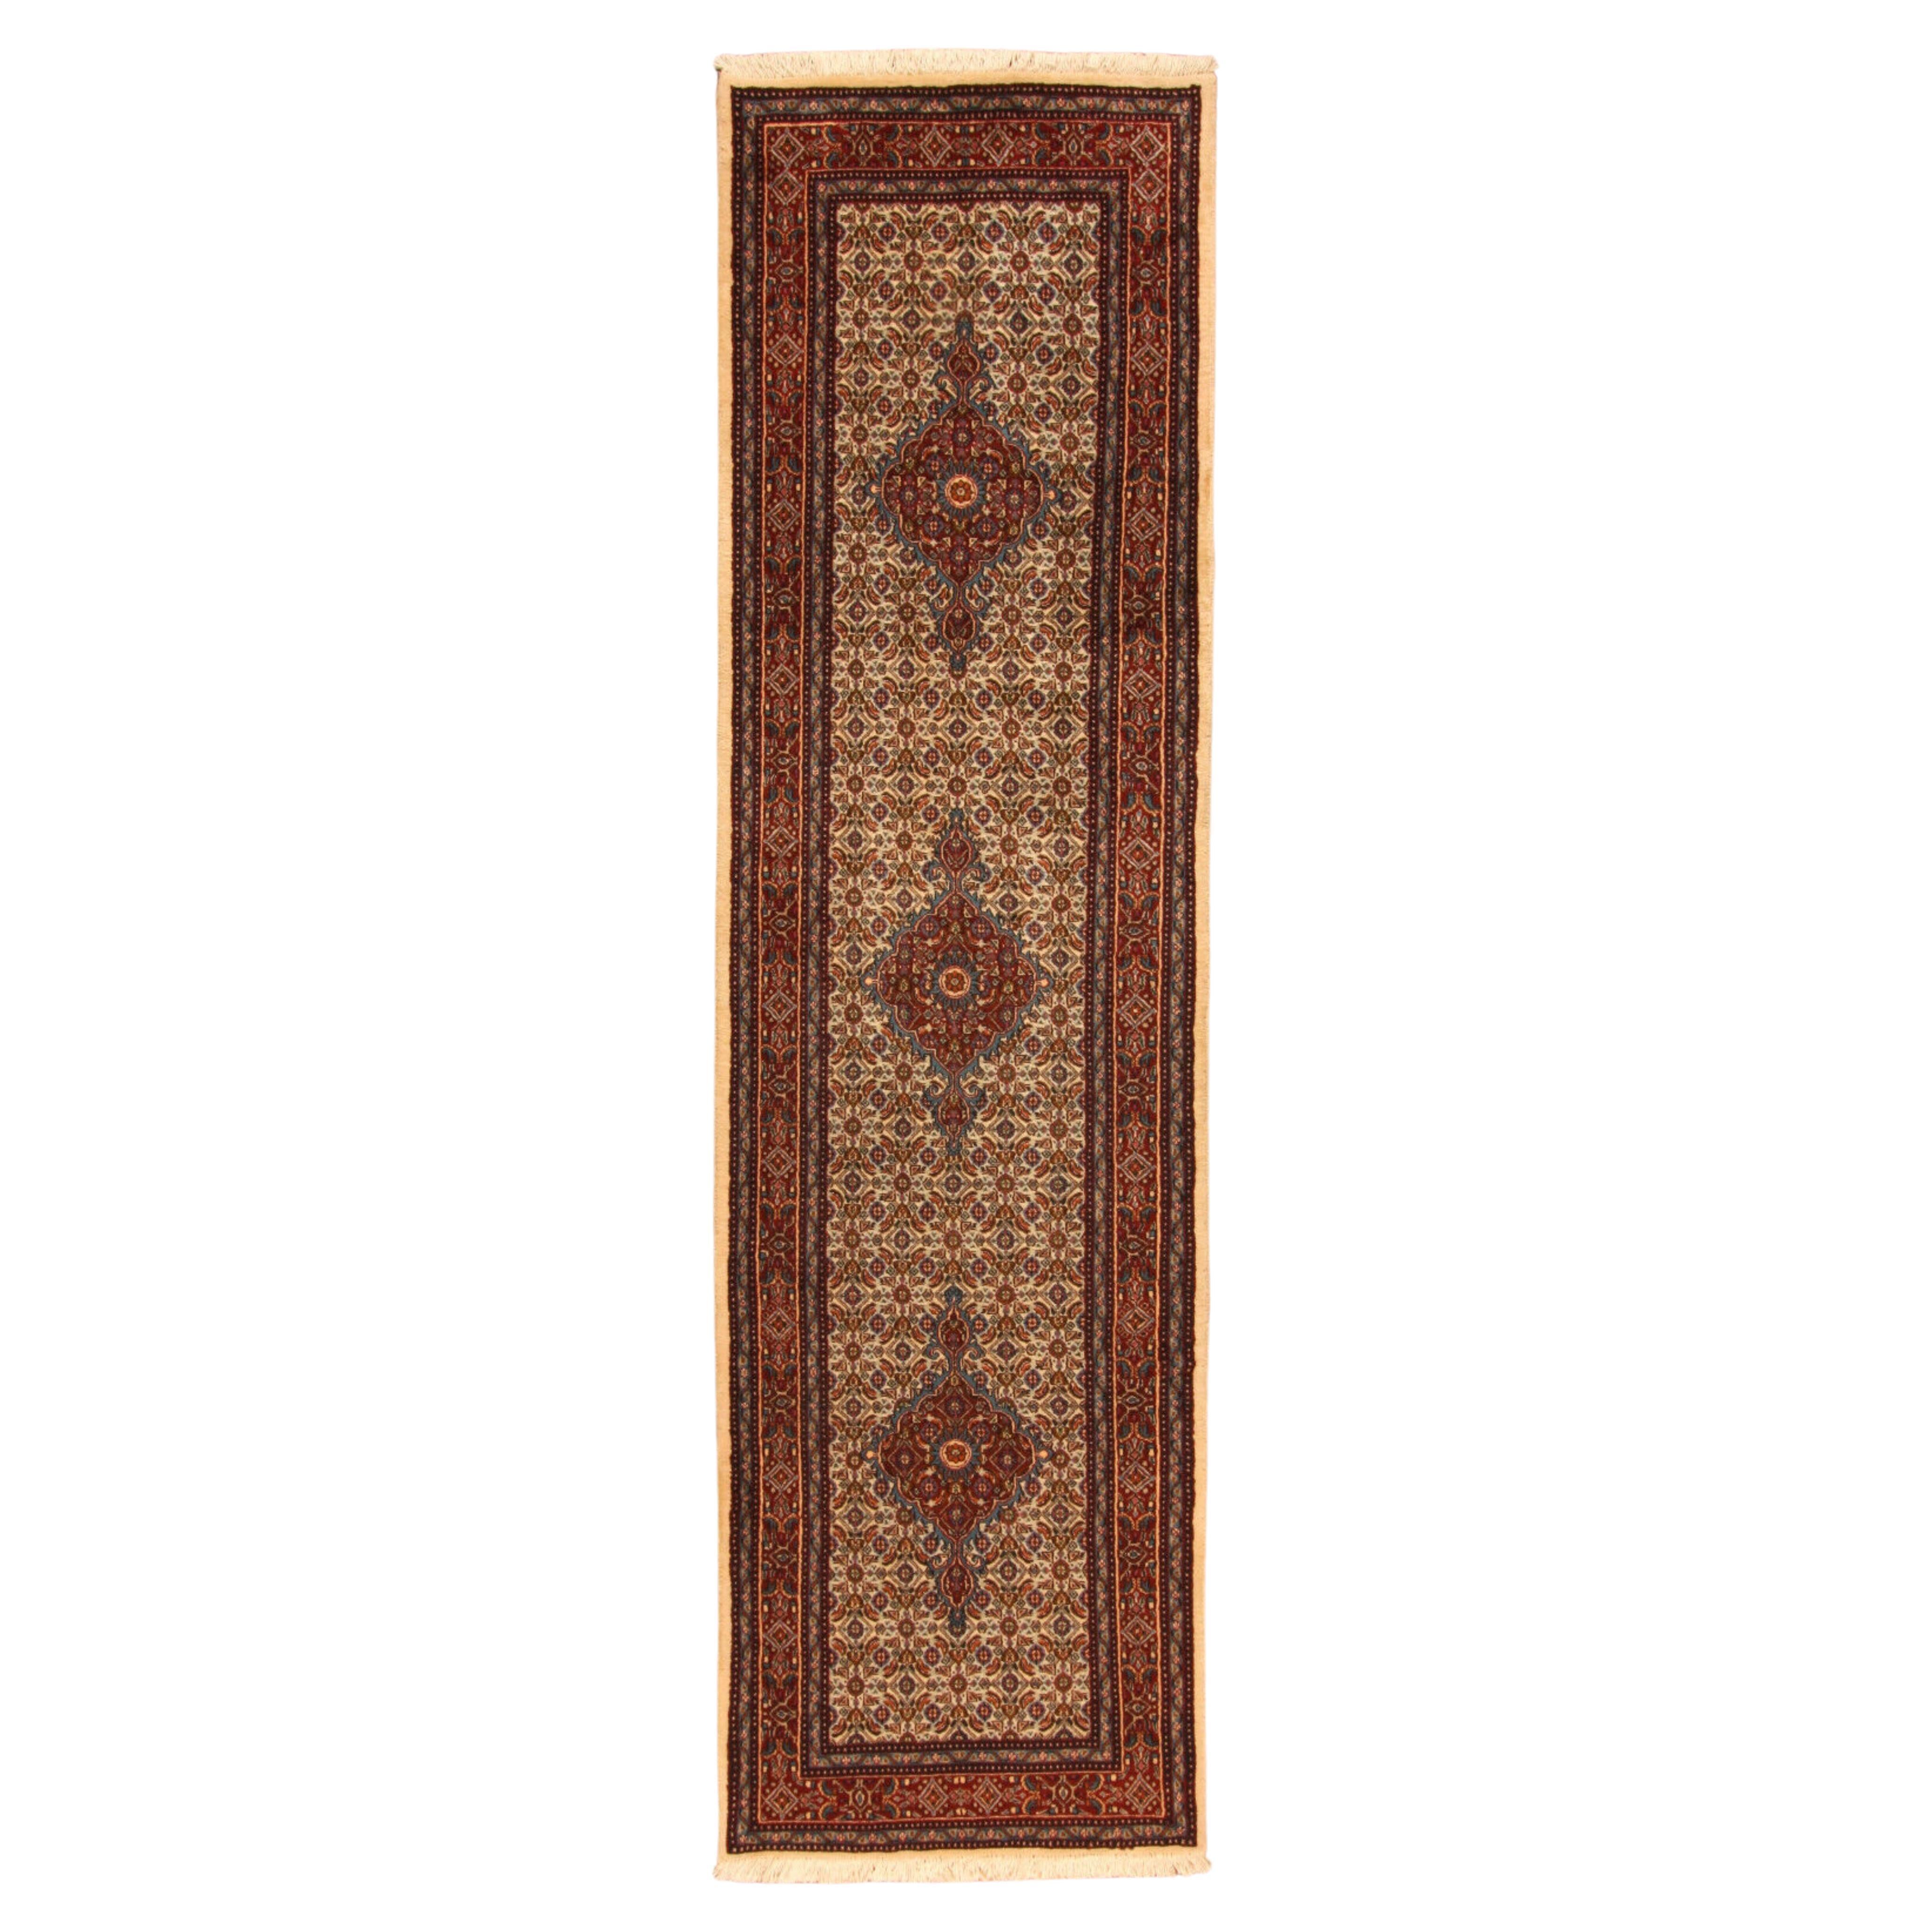 Handmade Vintage Persian Style Moud Runner Rug 2.6' x 9.6', 1980s - 1T51 For Sale